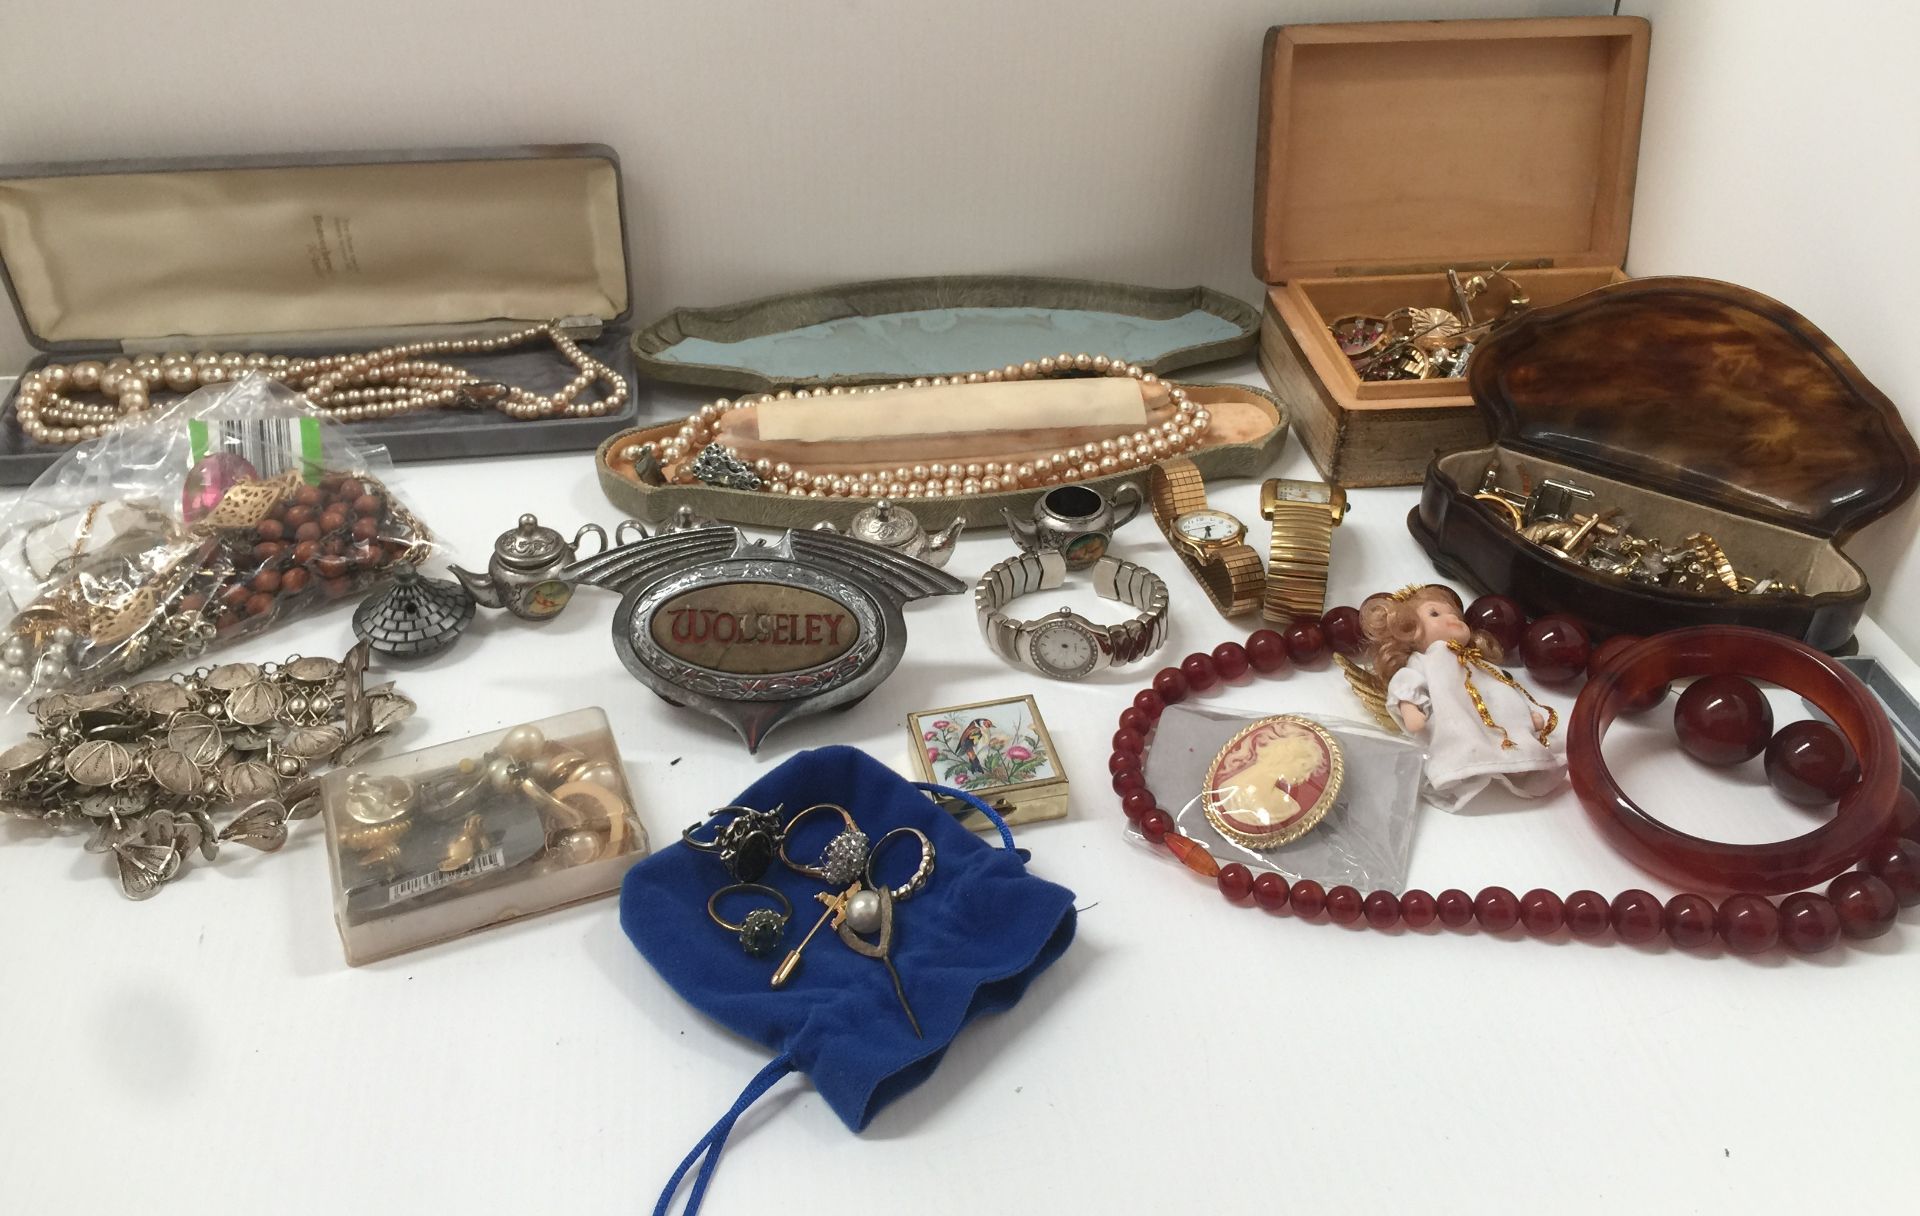 Contents to box - Wolseley car badge, quantity of costume jewellery including pearl necklaces,